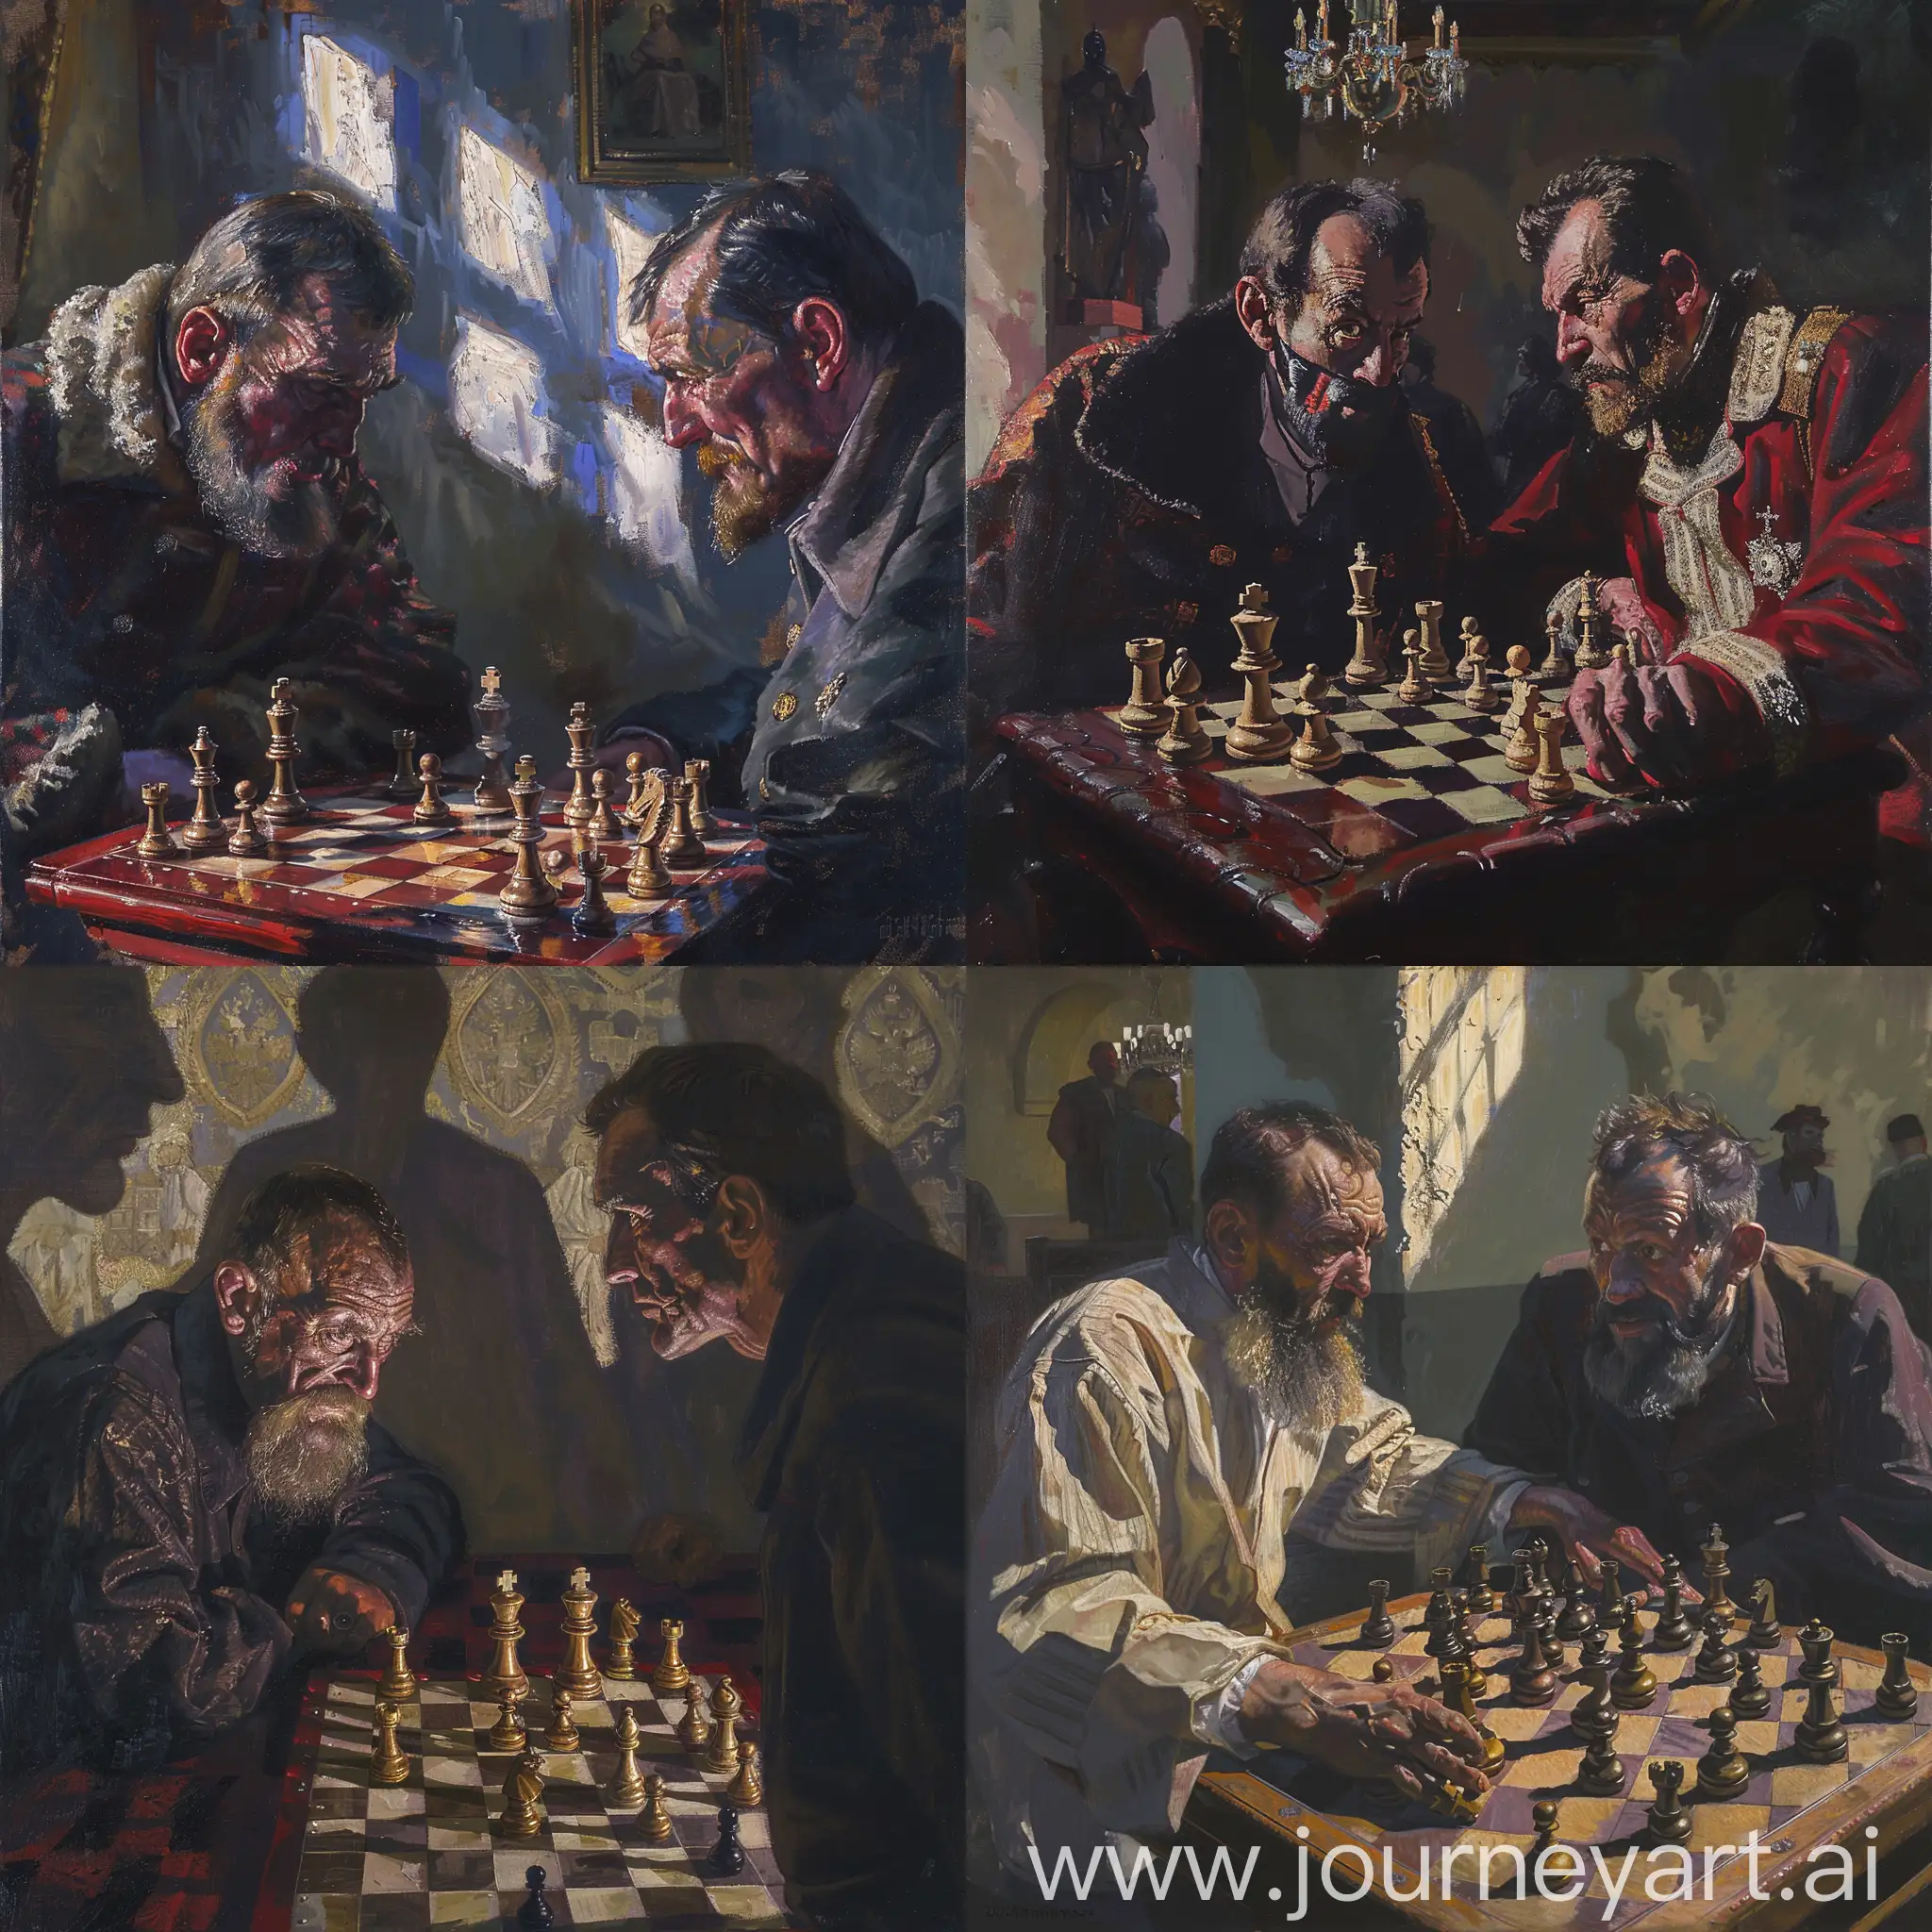 An oil painting showcasing Ivan the Terrible and Bogdan Belsky locked in a tense game of chess, each man's face a mask of concentration and strategy. The setting could be a dimly lit chamber in the Kremlin, with shadows dancing ominously across the walls, echoing the psychological warfare being waged across the chessboard. The painting captures the intensity of their rivalry and the high stakes involved in their intellectual duel.